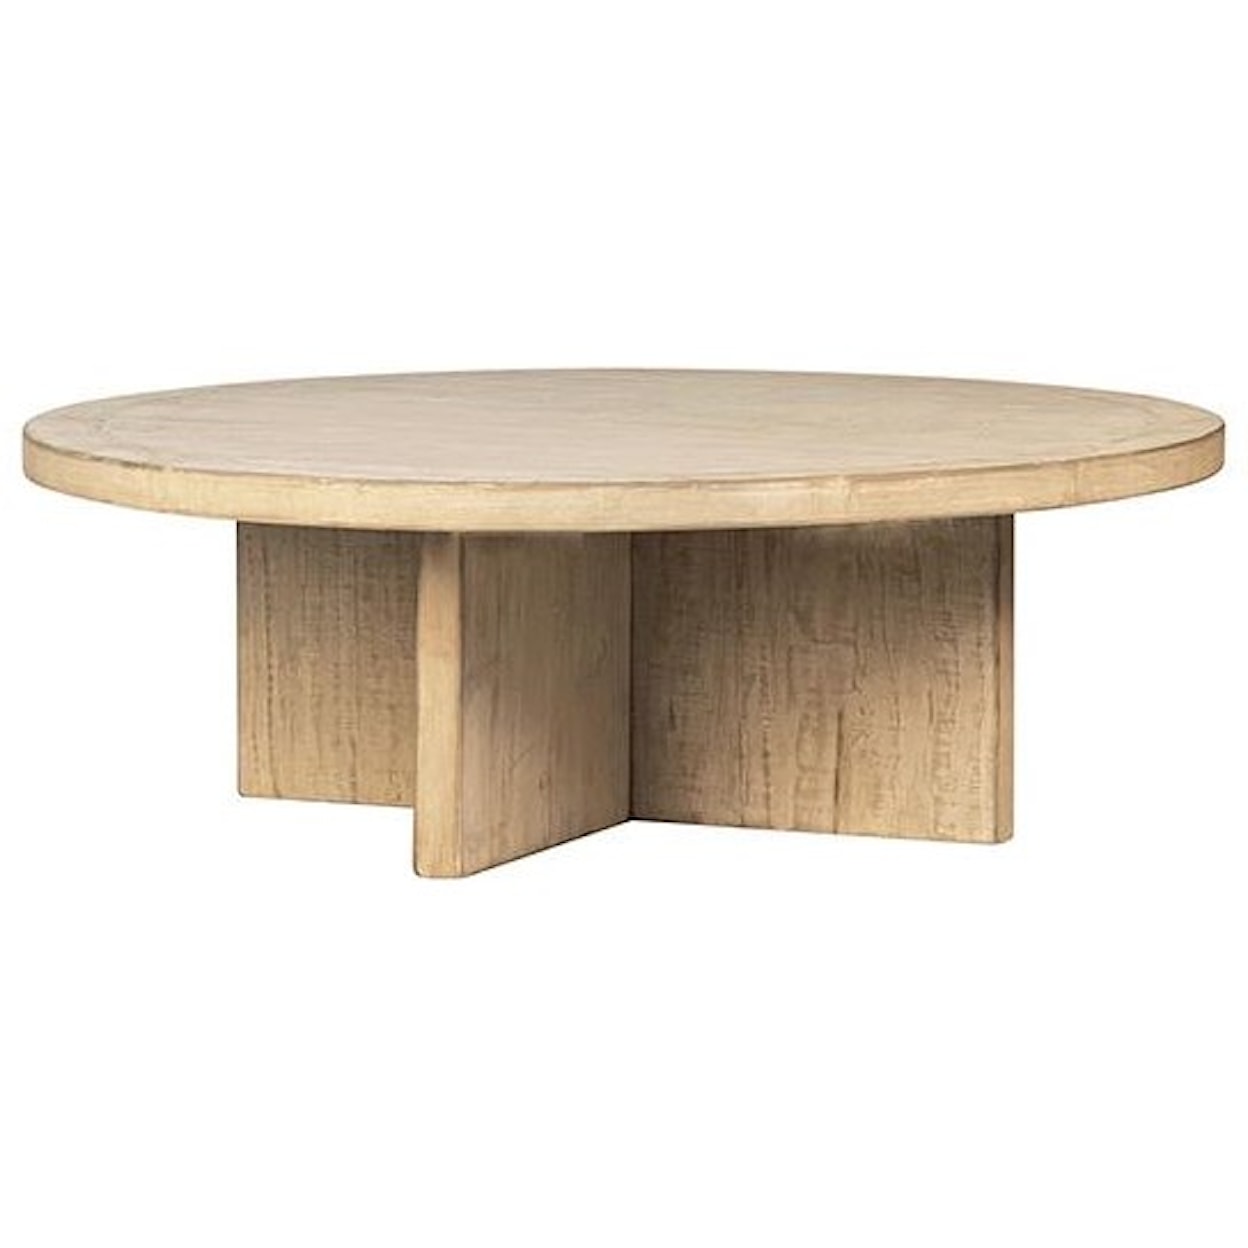 Dovetail Furniture Cocktail Tables Harley Coffee Table